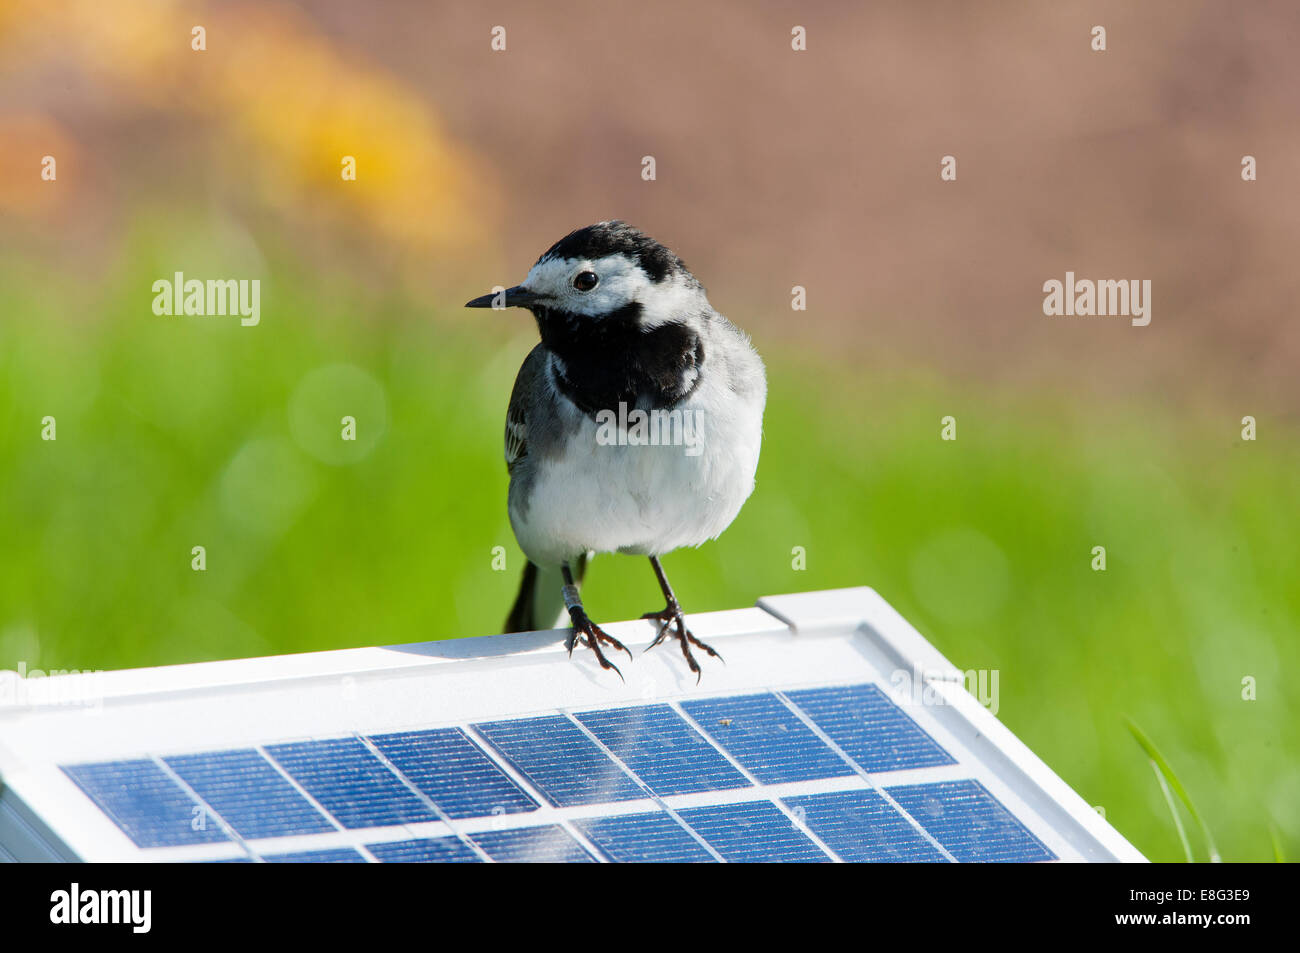 Pied Wagtail Mottacilla alba yarrelli adult male in breeding plumage perched on solar panel Stock Photo